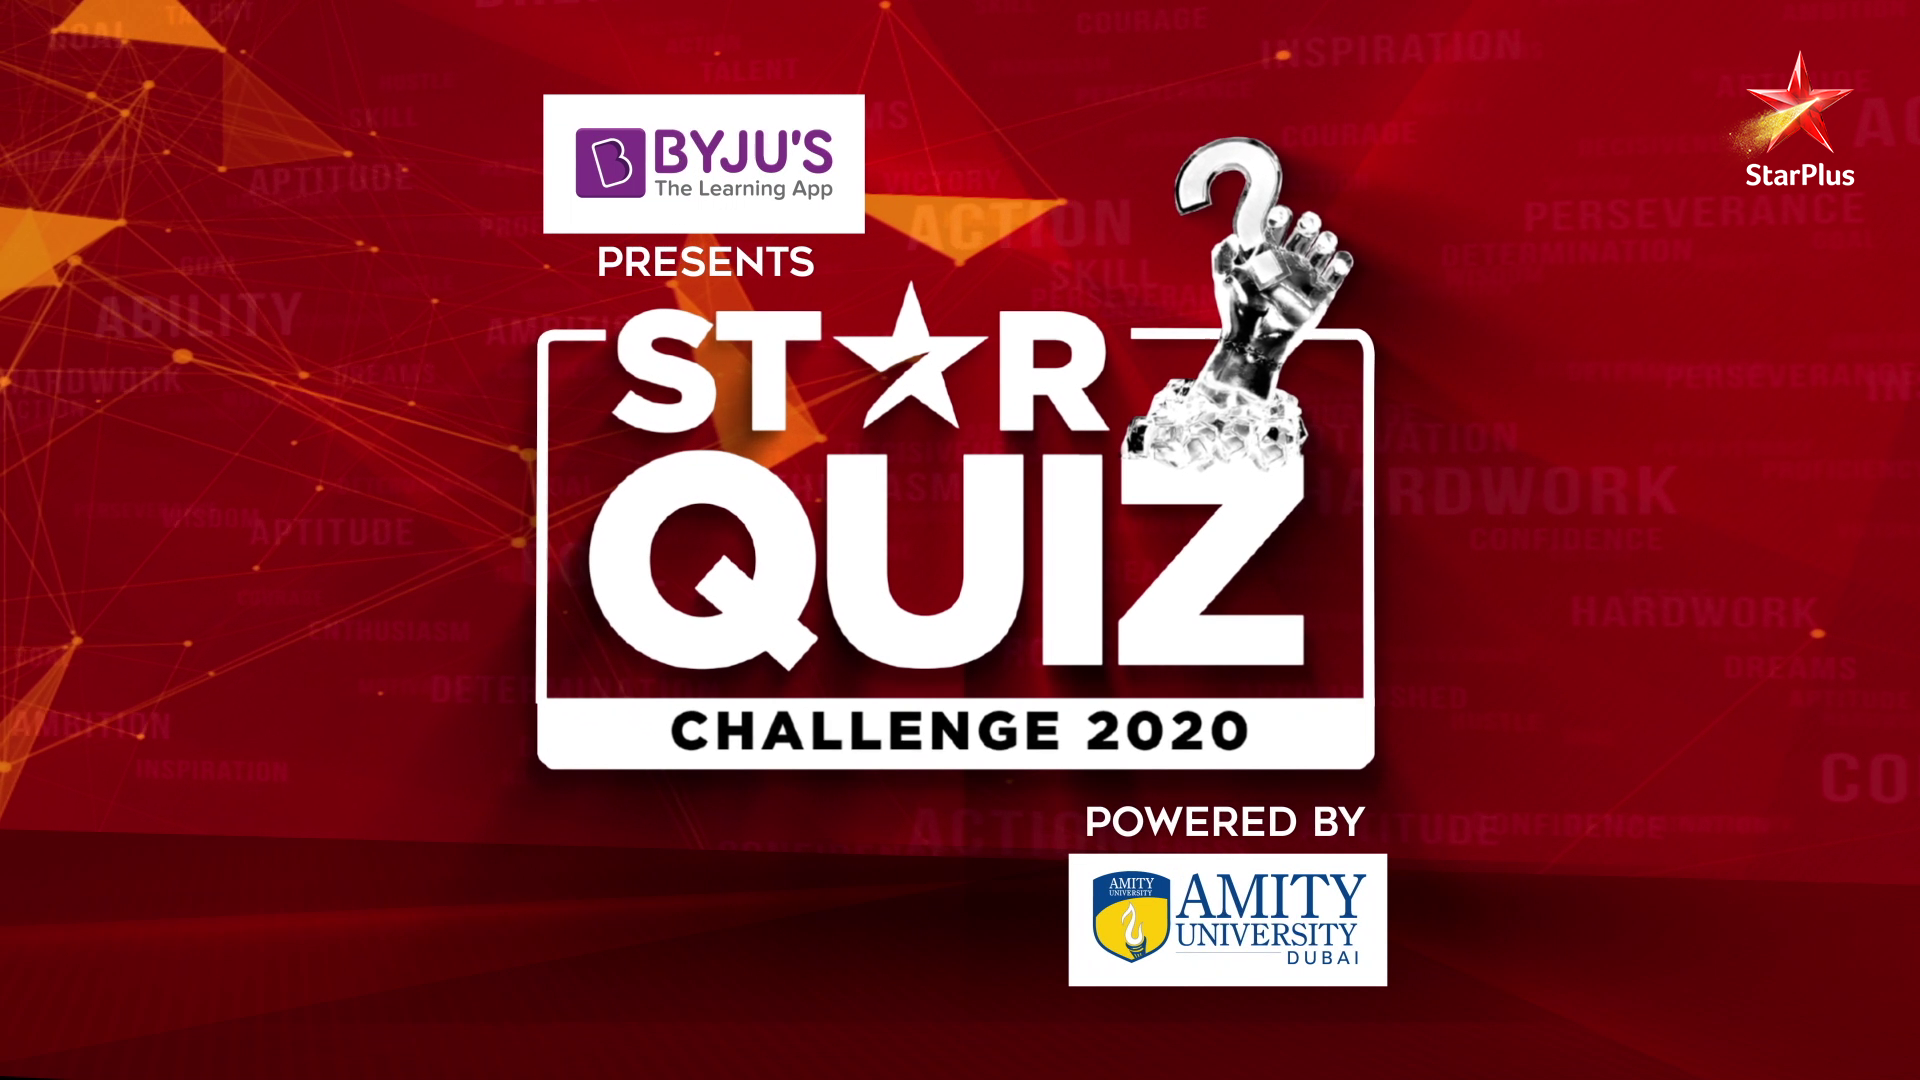 STAR Quiz Challenge 2020 resurfaces in an all-new avatar in Star Plus